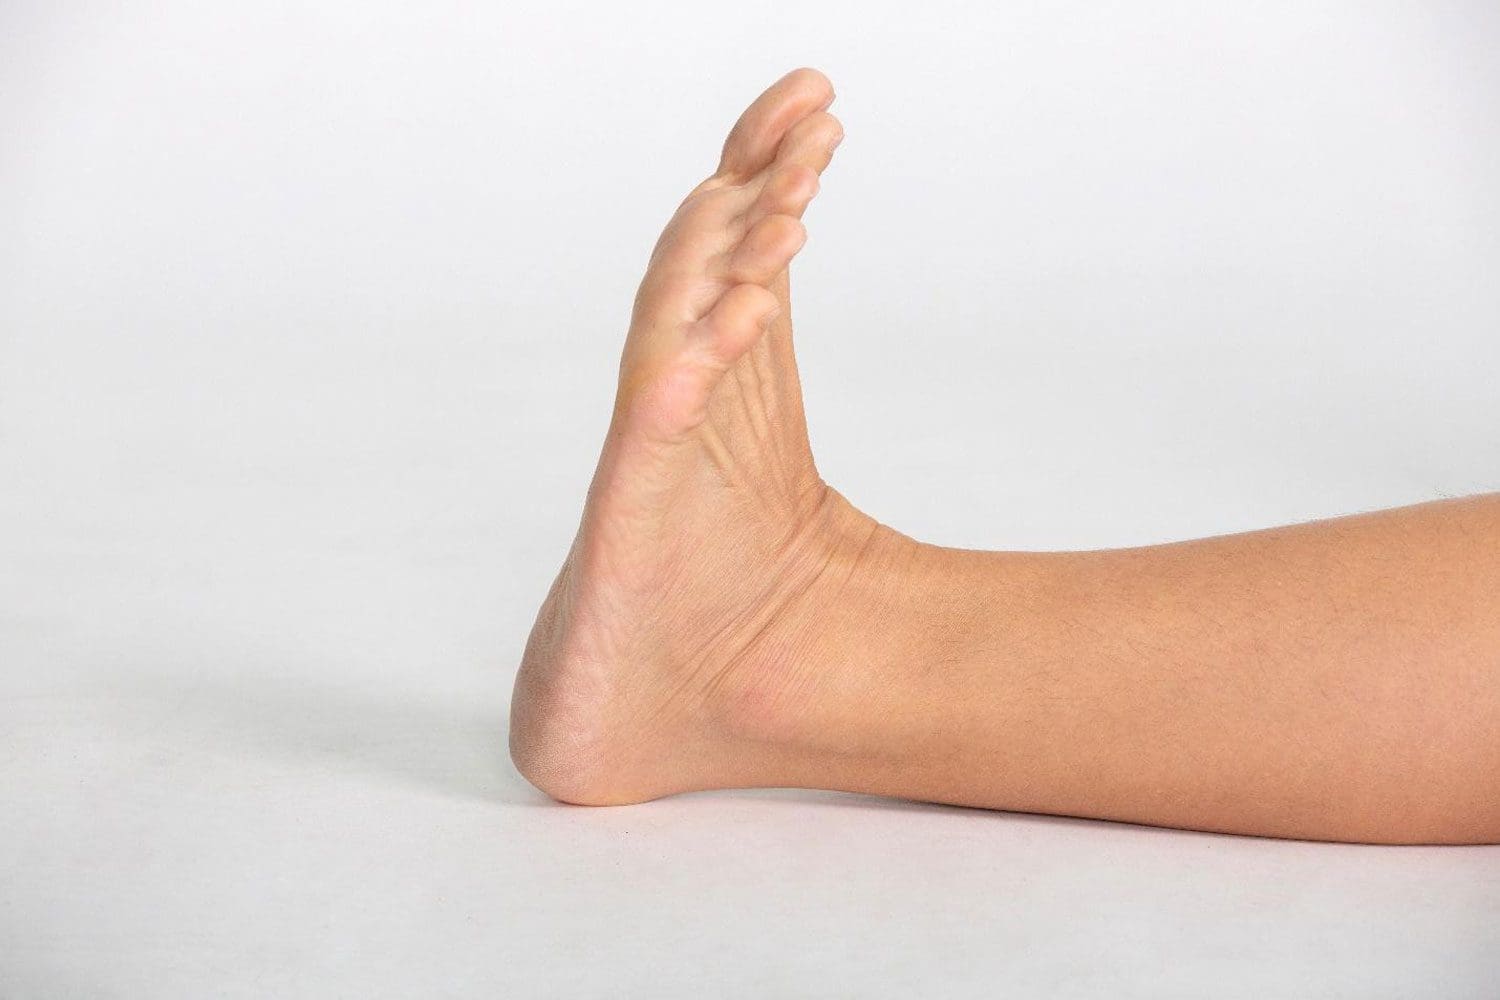 A foot and ankle